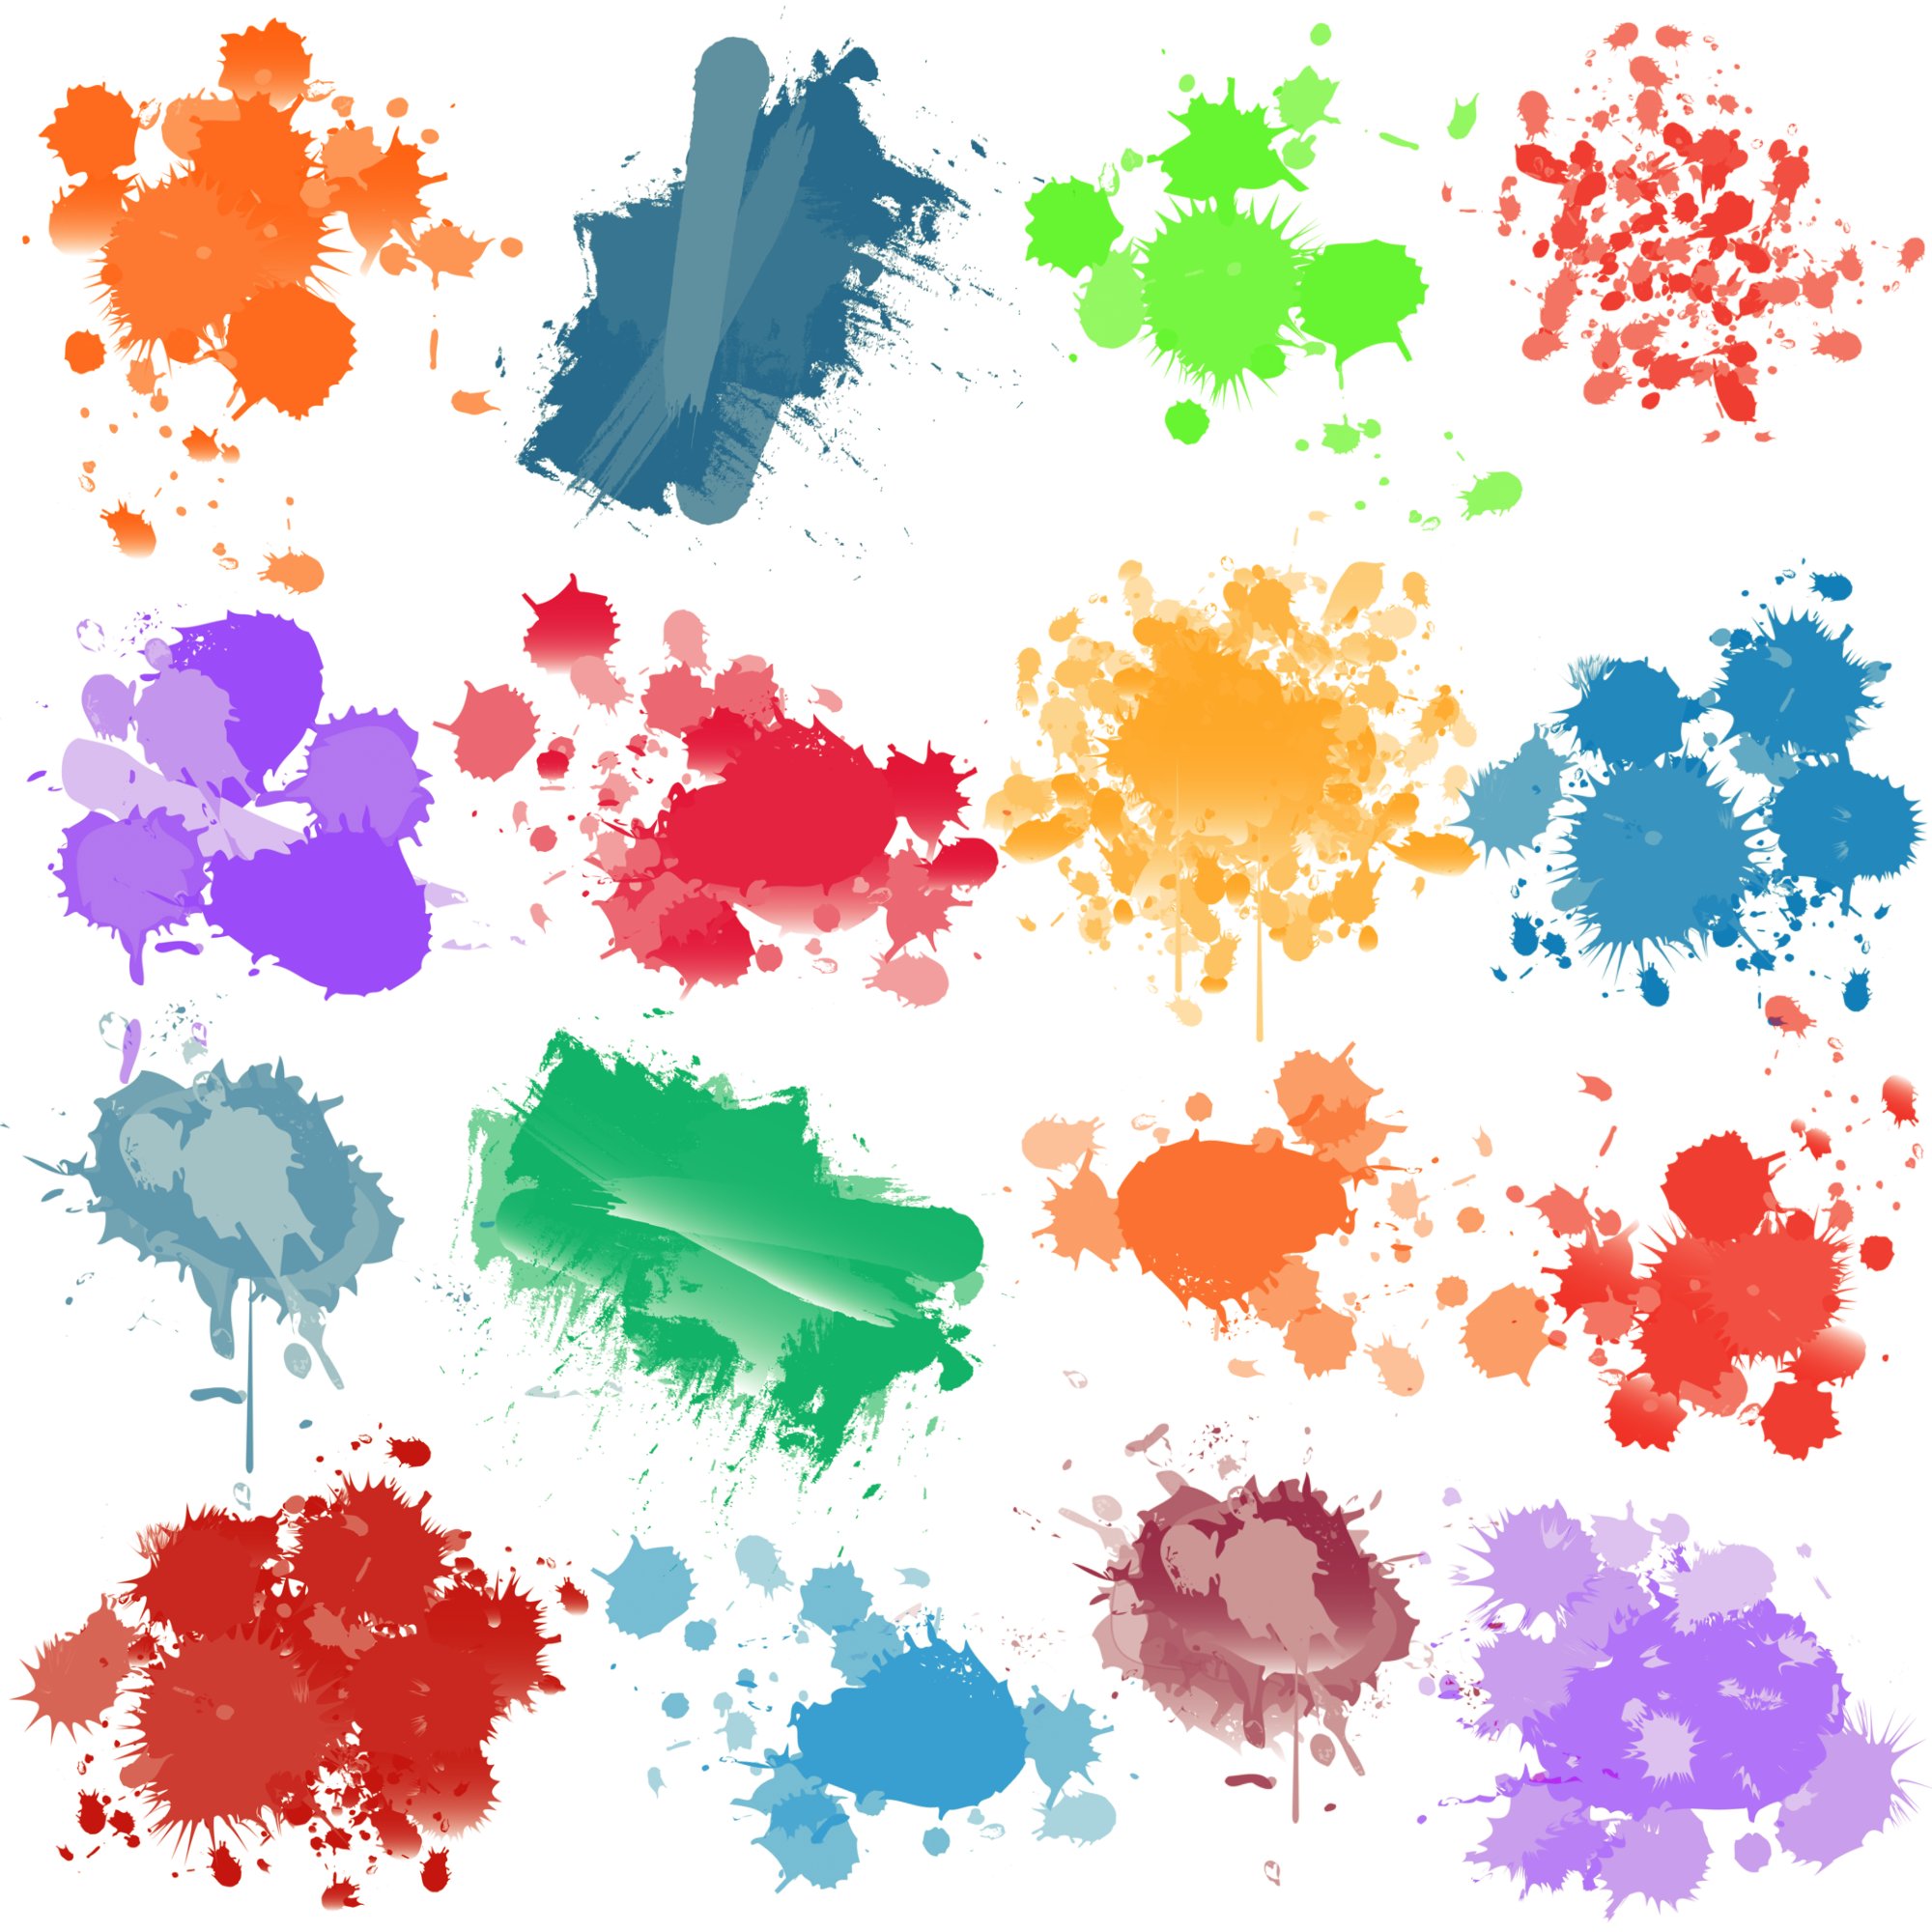 Paint Splatters Photoshop Brushespreview image.